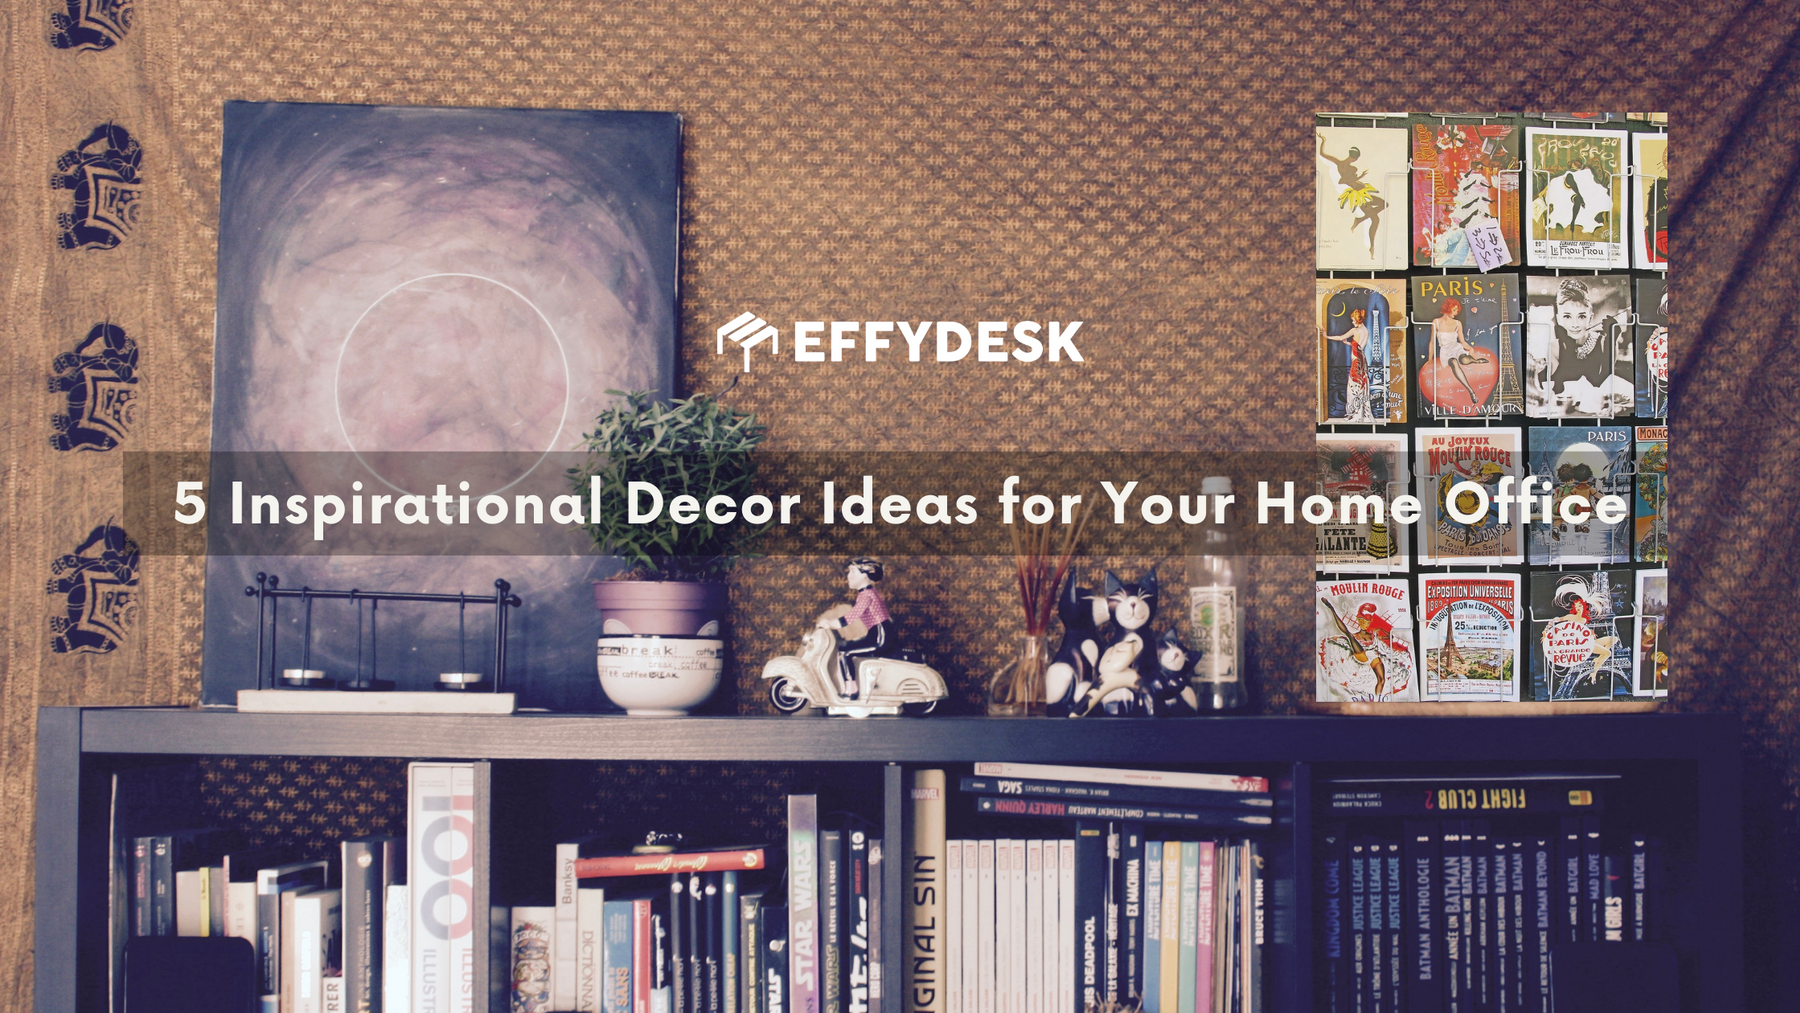 learn more about how to decor your home office